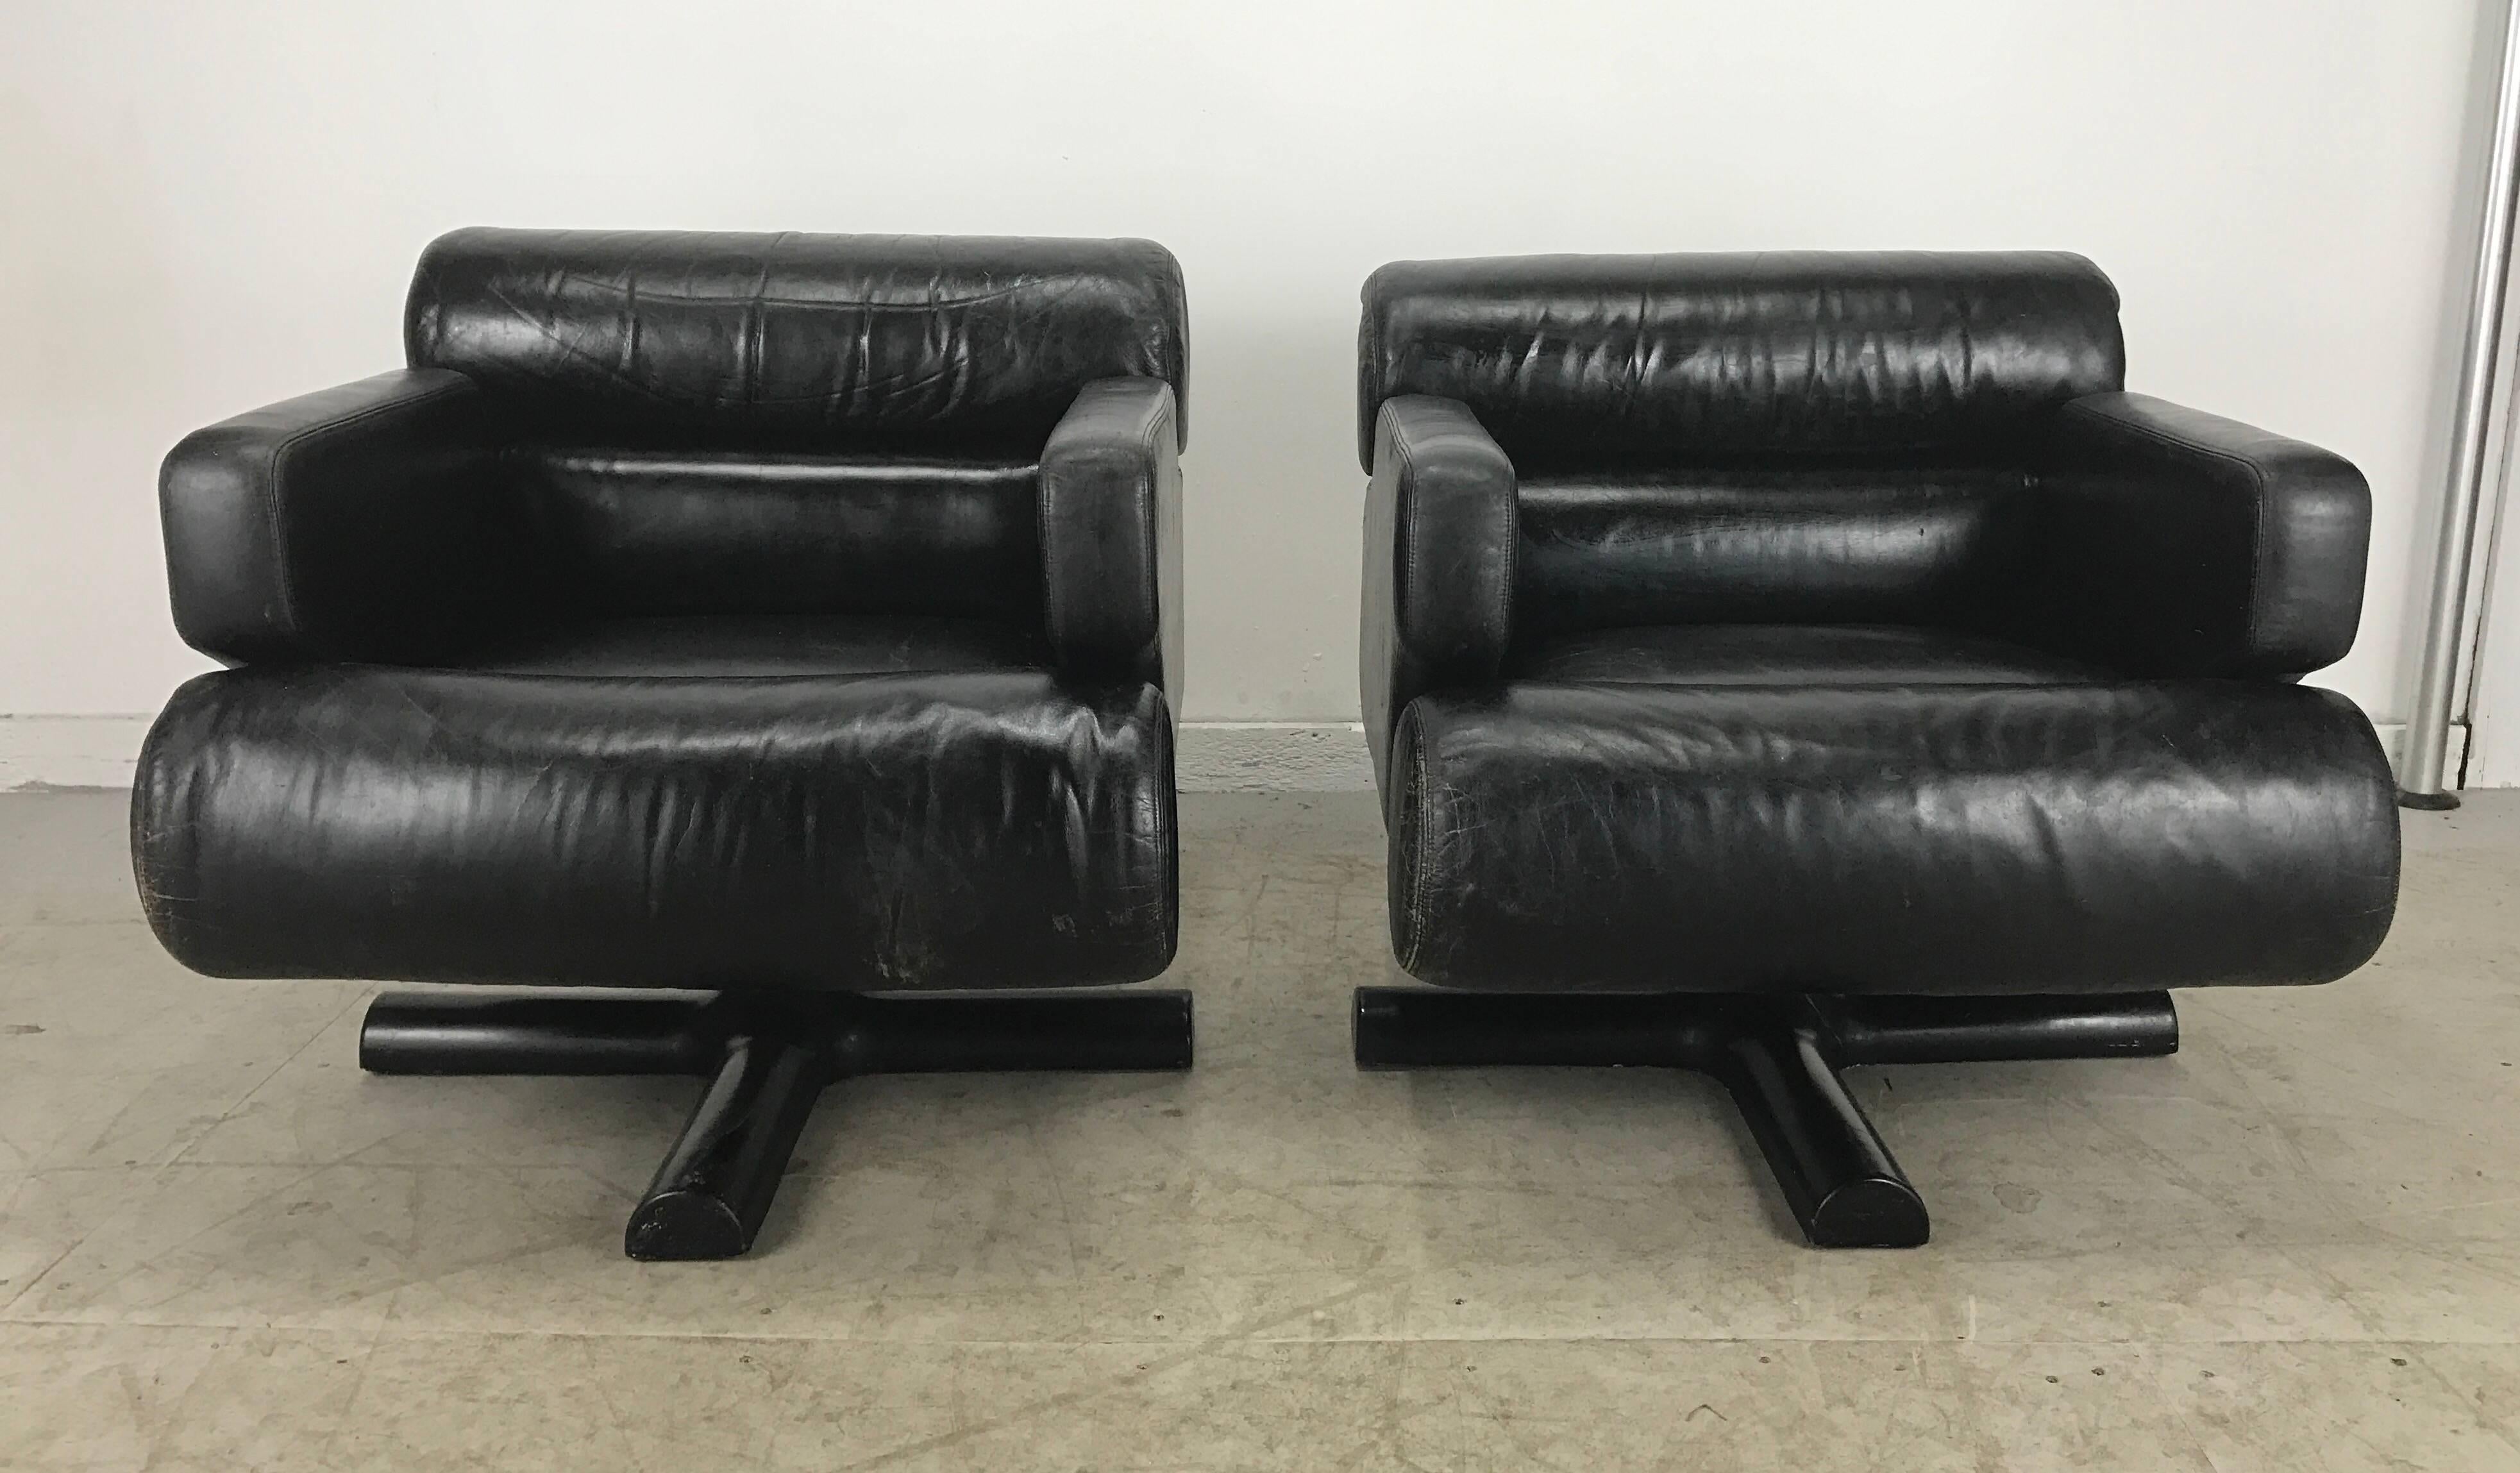 Stunning and sexy pair of black leather lounge chairs, Space age ..pop..reminiscent of classic Italian designs by the likes of by Joe Colombo,etc. Nice original condition, adjustable tilt swivel mechenism. Minor ware to leather, original fiberglass